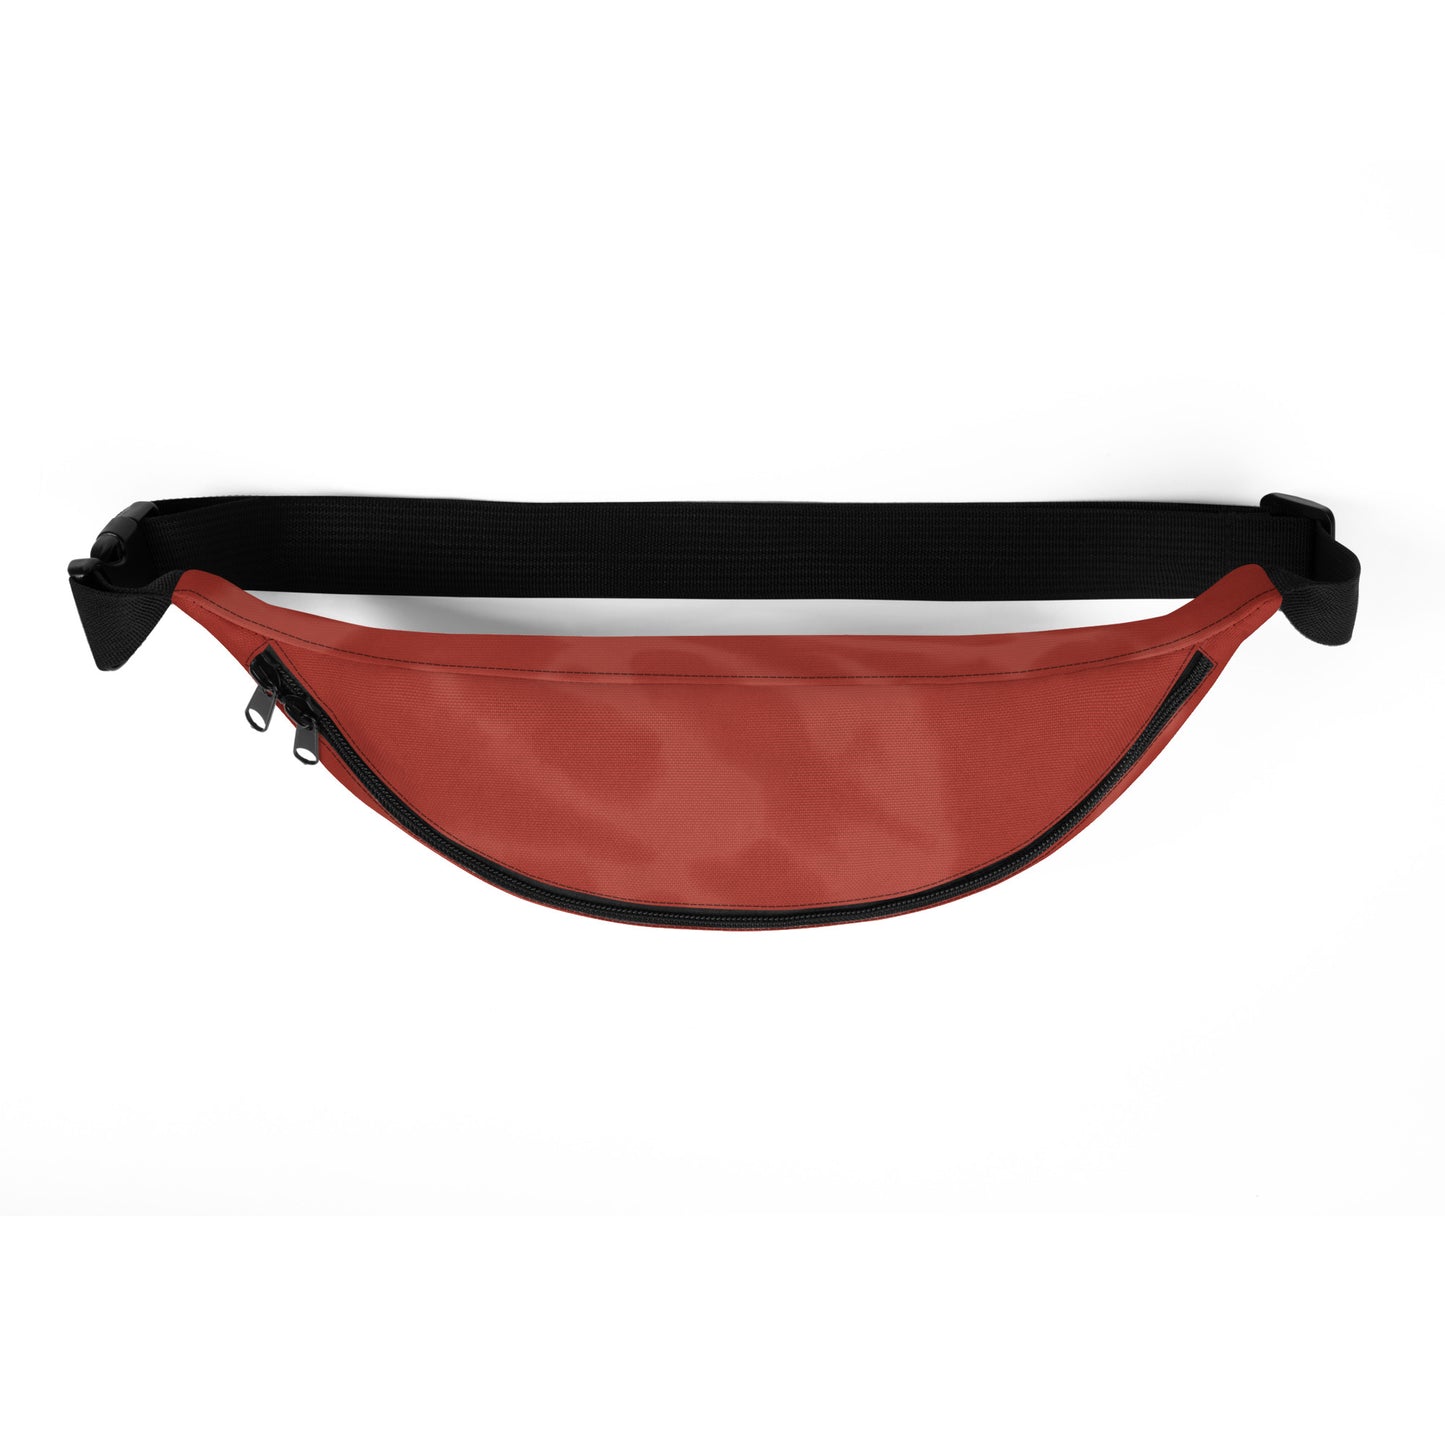 Travel Gift Fanny Pack - Red Tie-Dye • GIG Rio de Janeiro • YHM Designs - Image 08